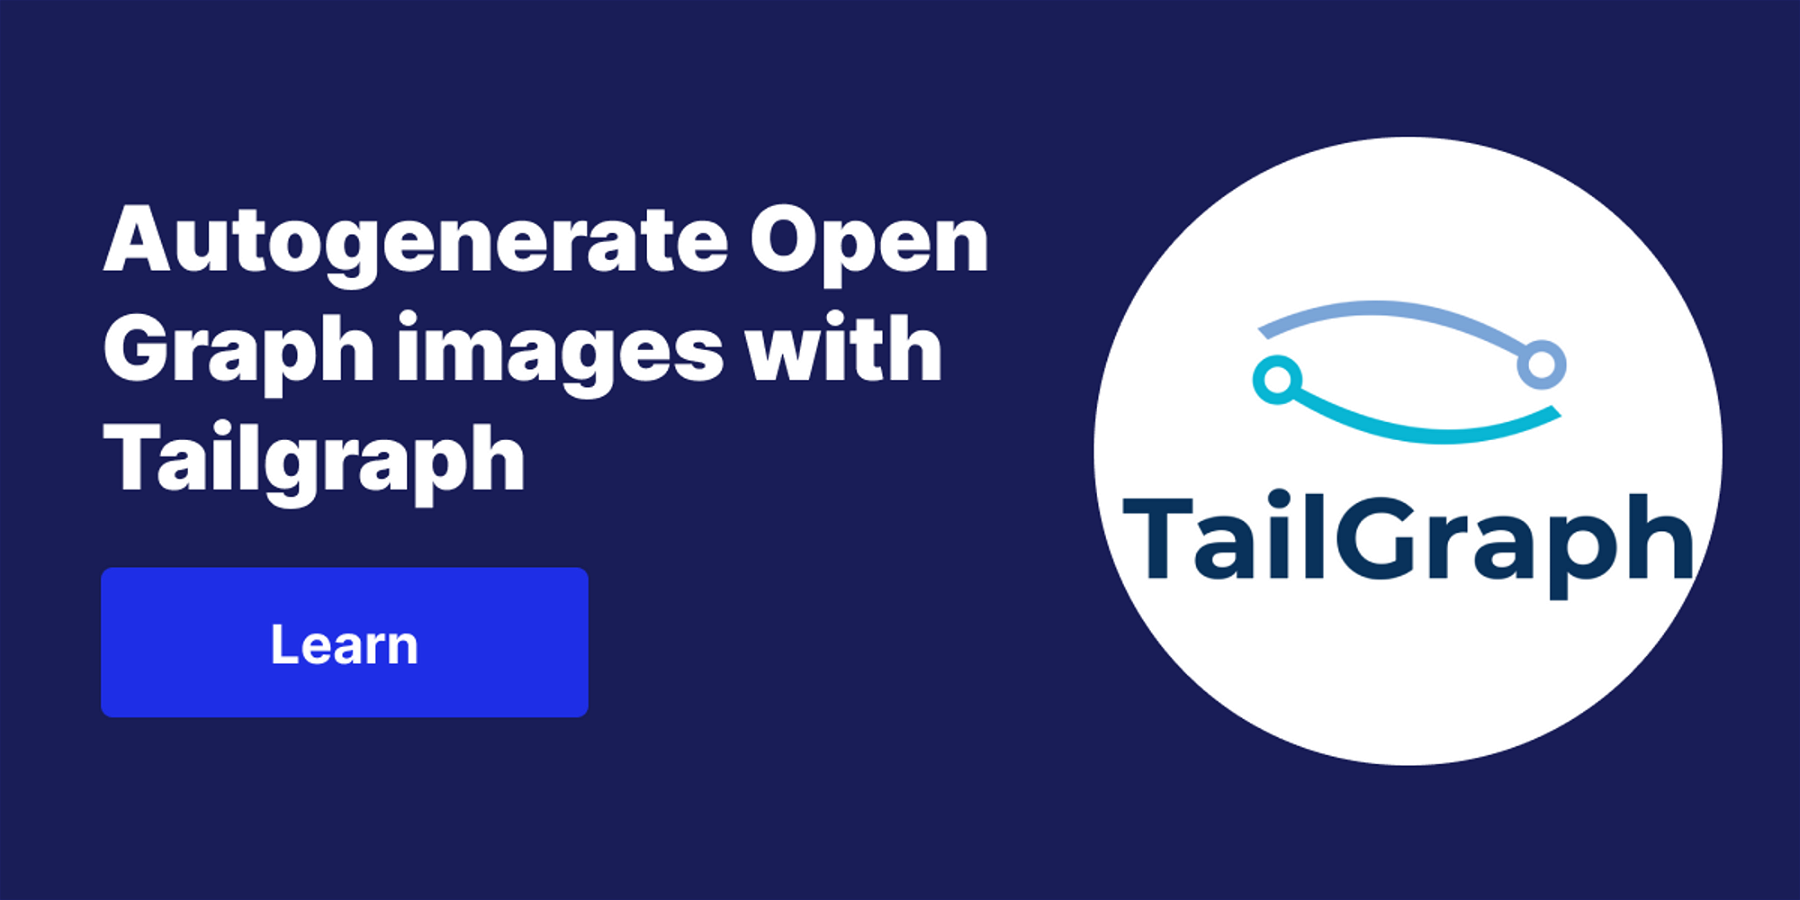 Autogenerate Open Graph Images with Tailgraph